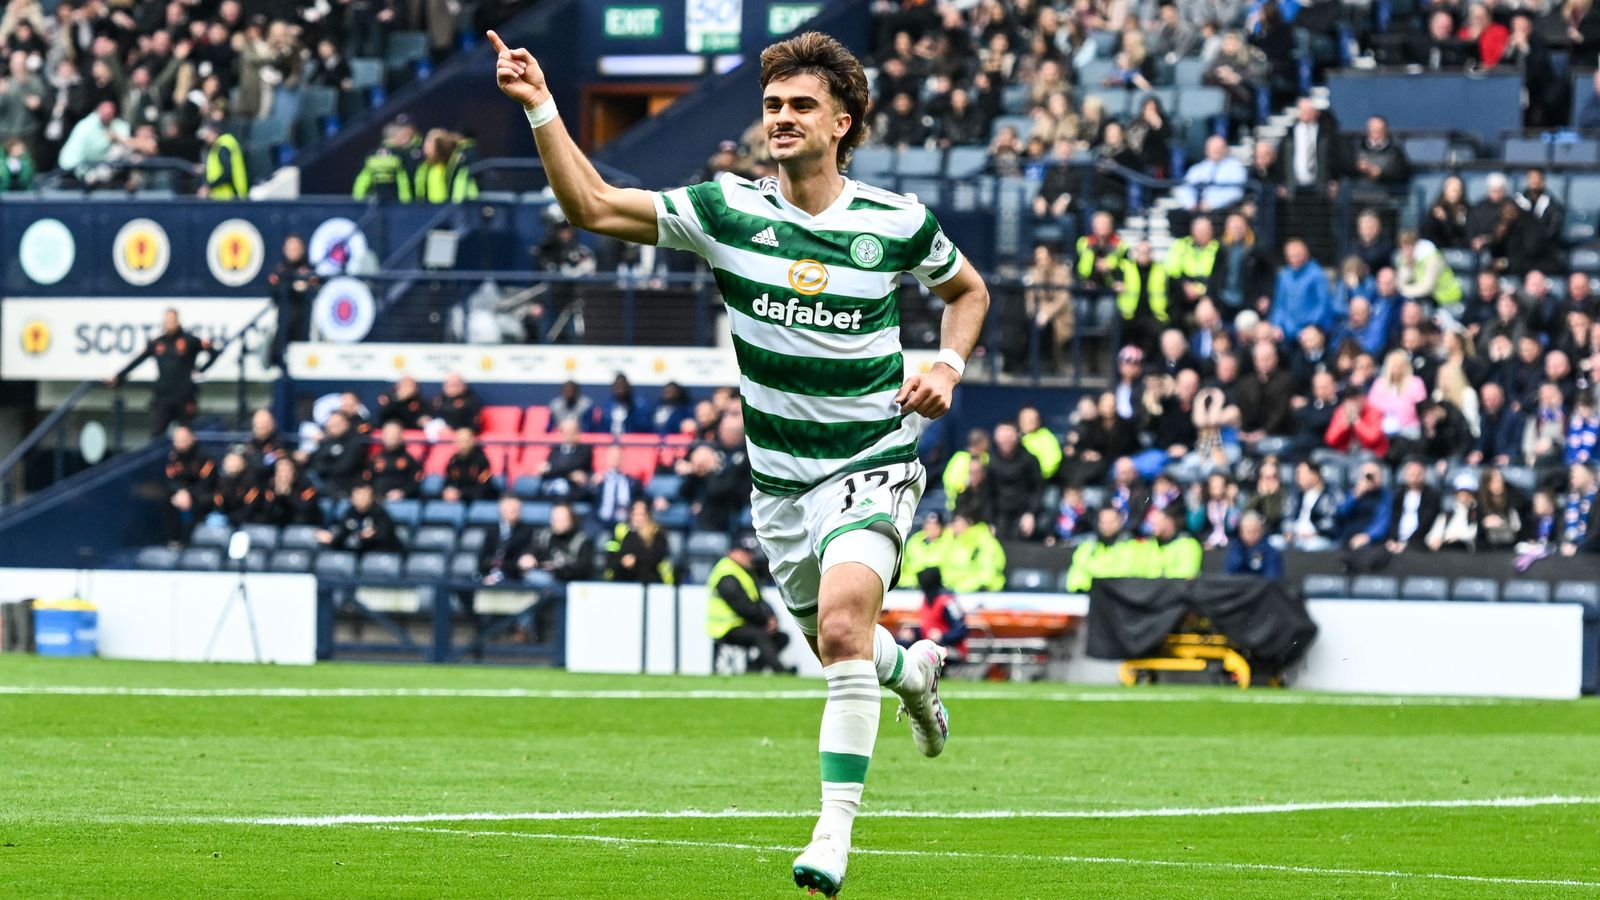 Celtic beat Rangers to book Scottish Cup final place thumbnail